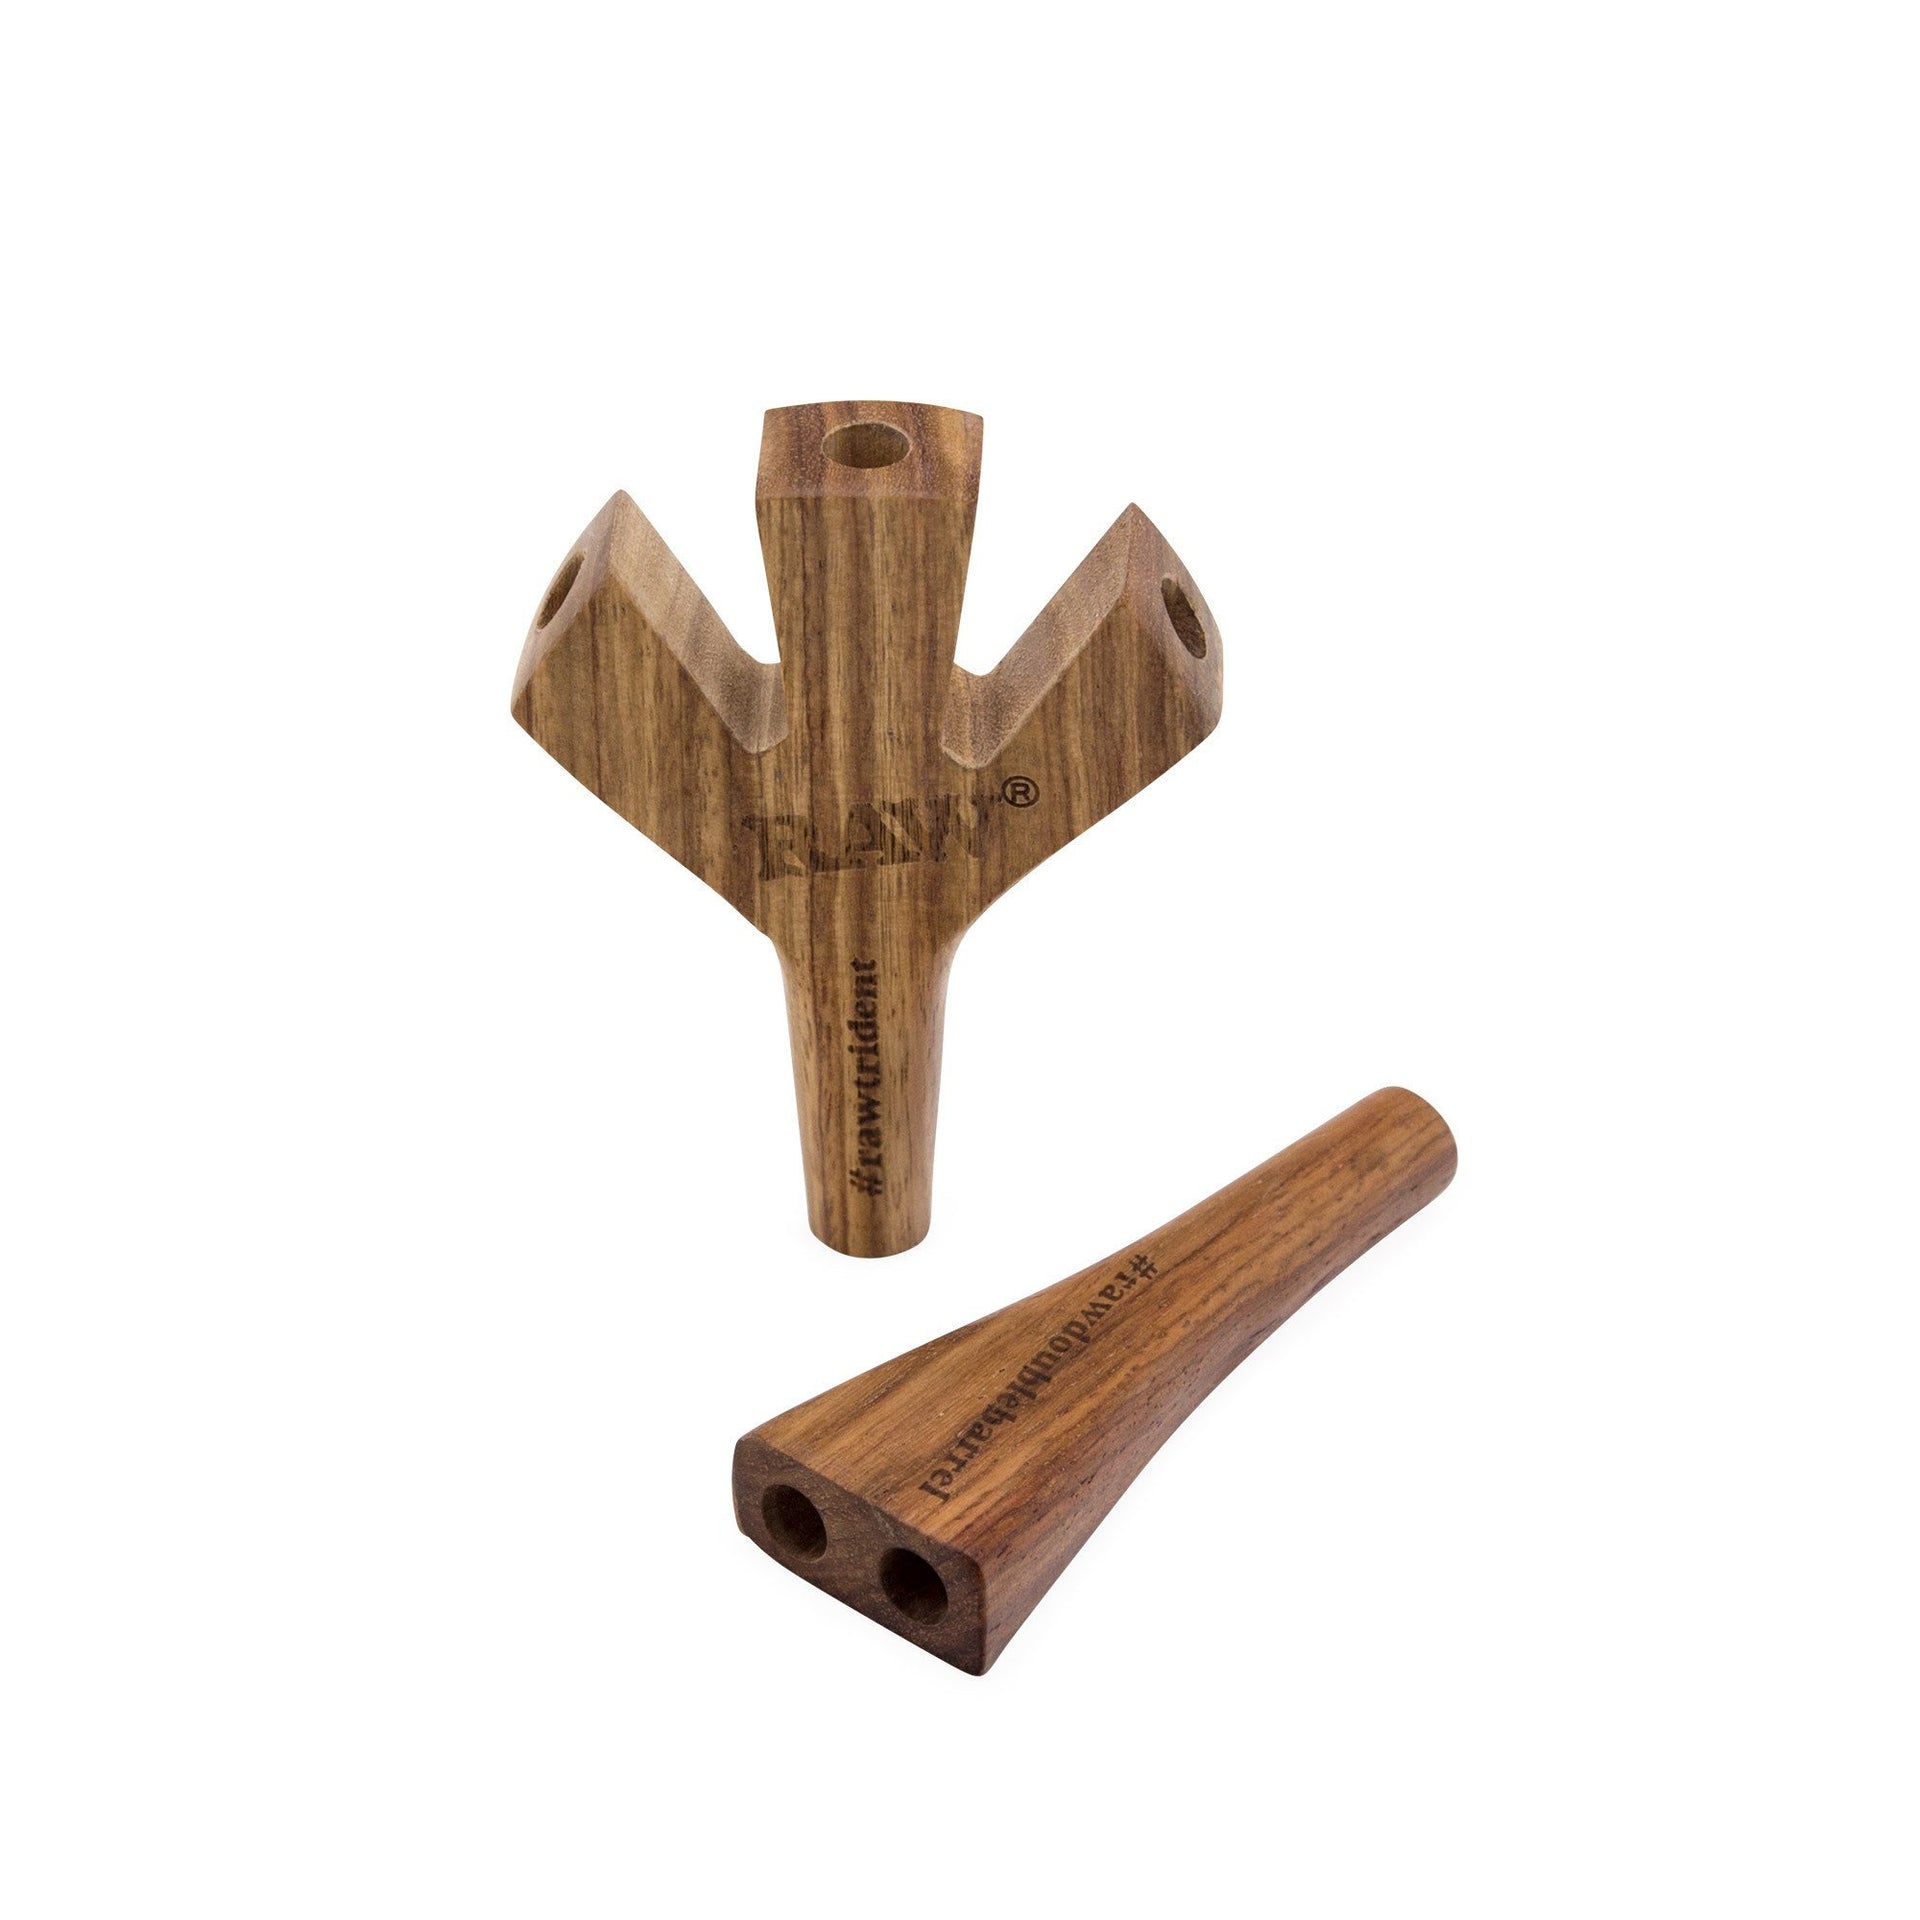 RAW Trident Joint Holder - 420 Science - The most trusted online smoke shop.